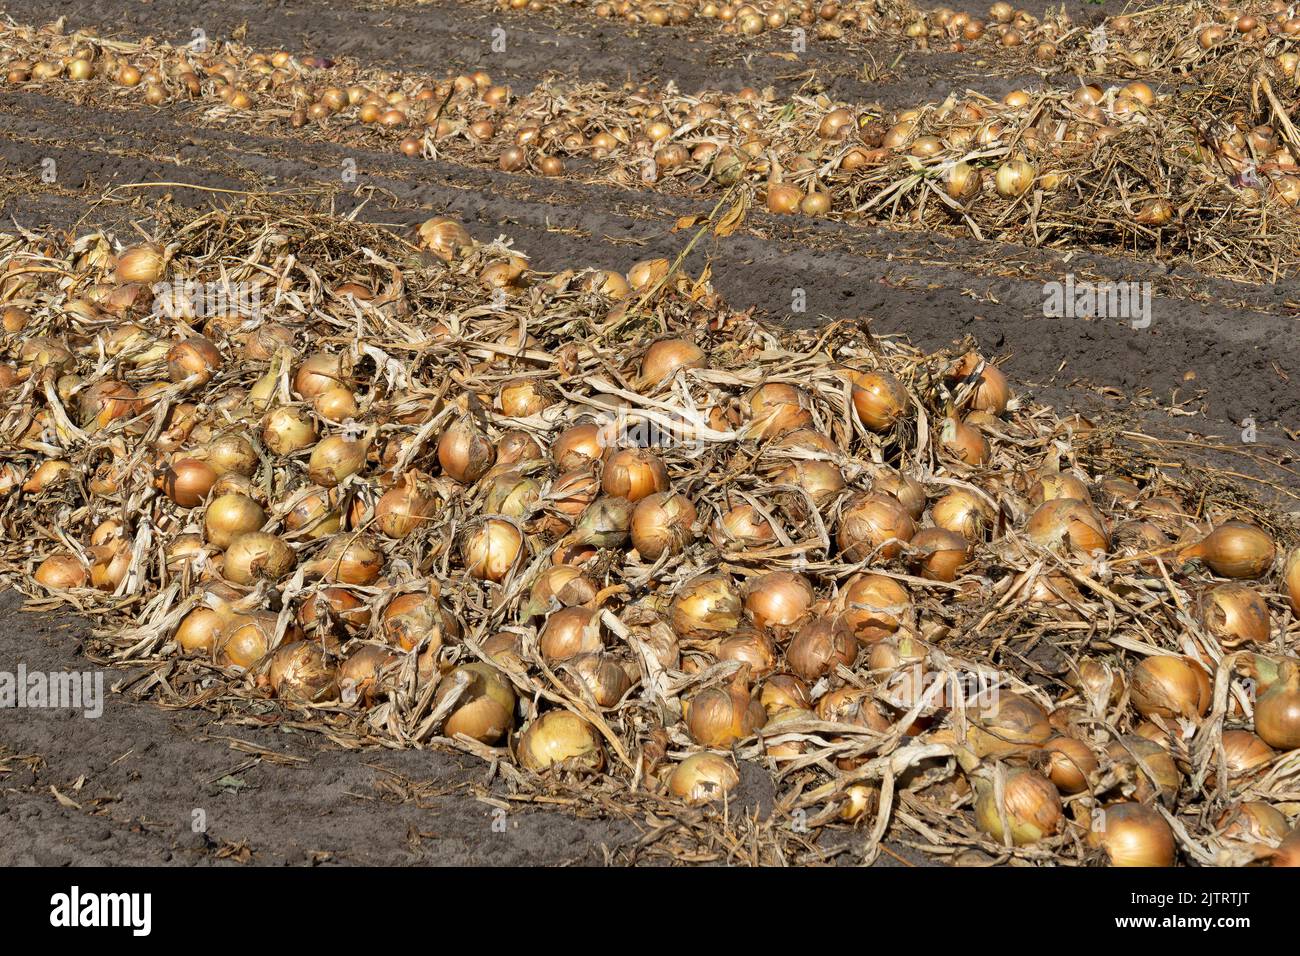 The harvest of onions on the farmland, ready for consumption, processing as dry matter or for export. Stock Photo